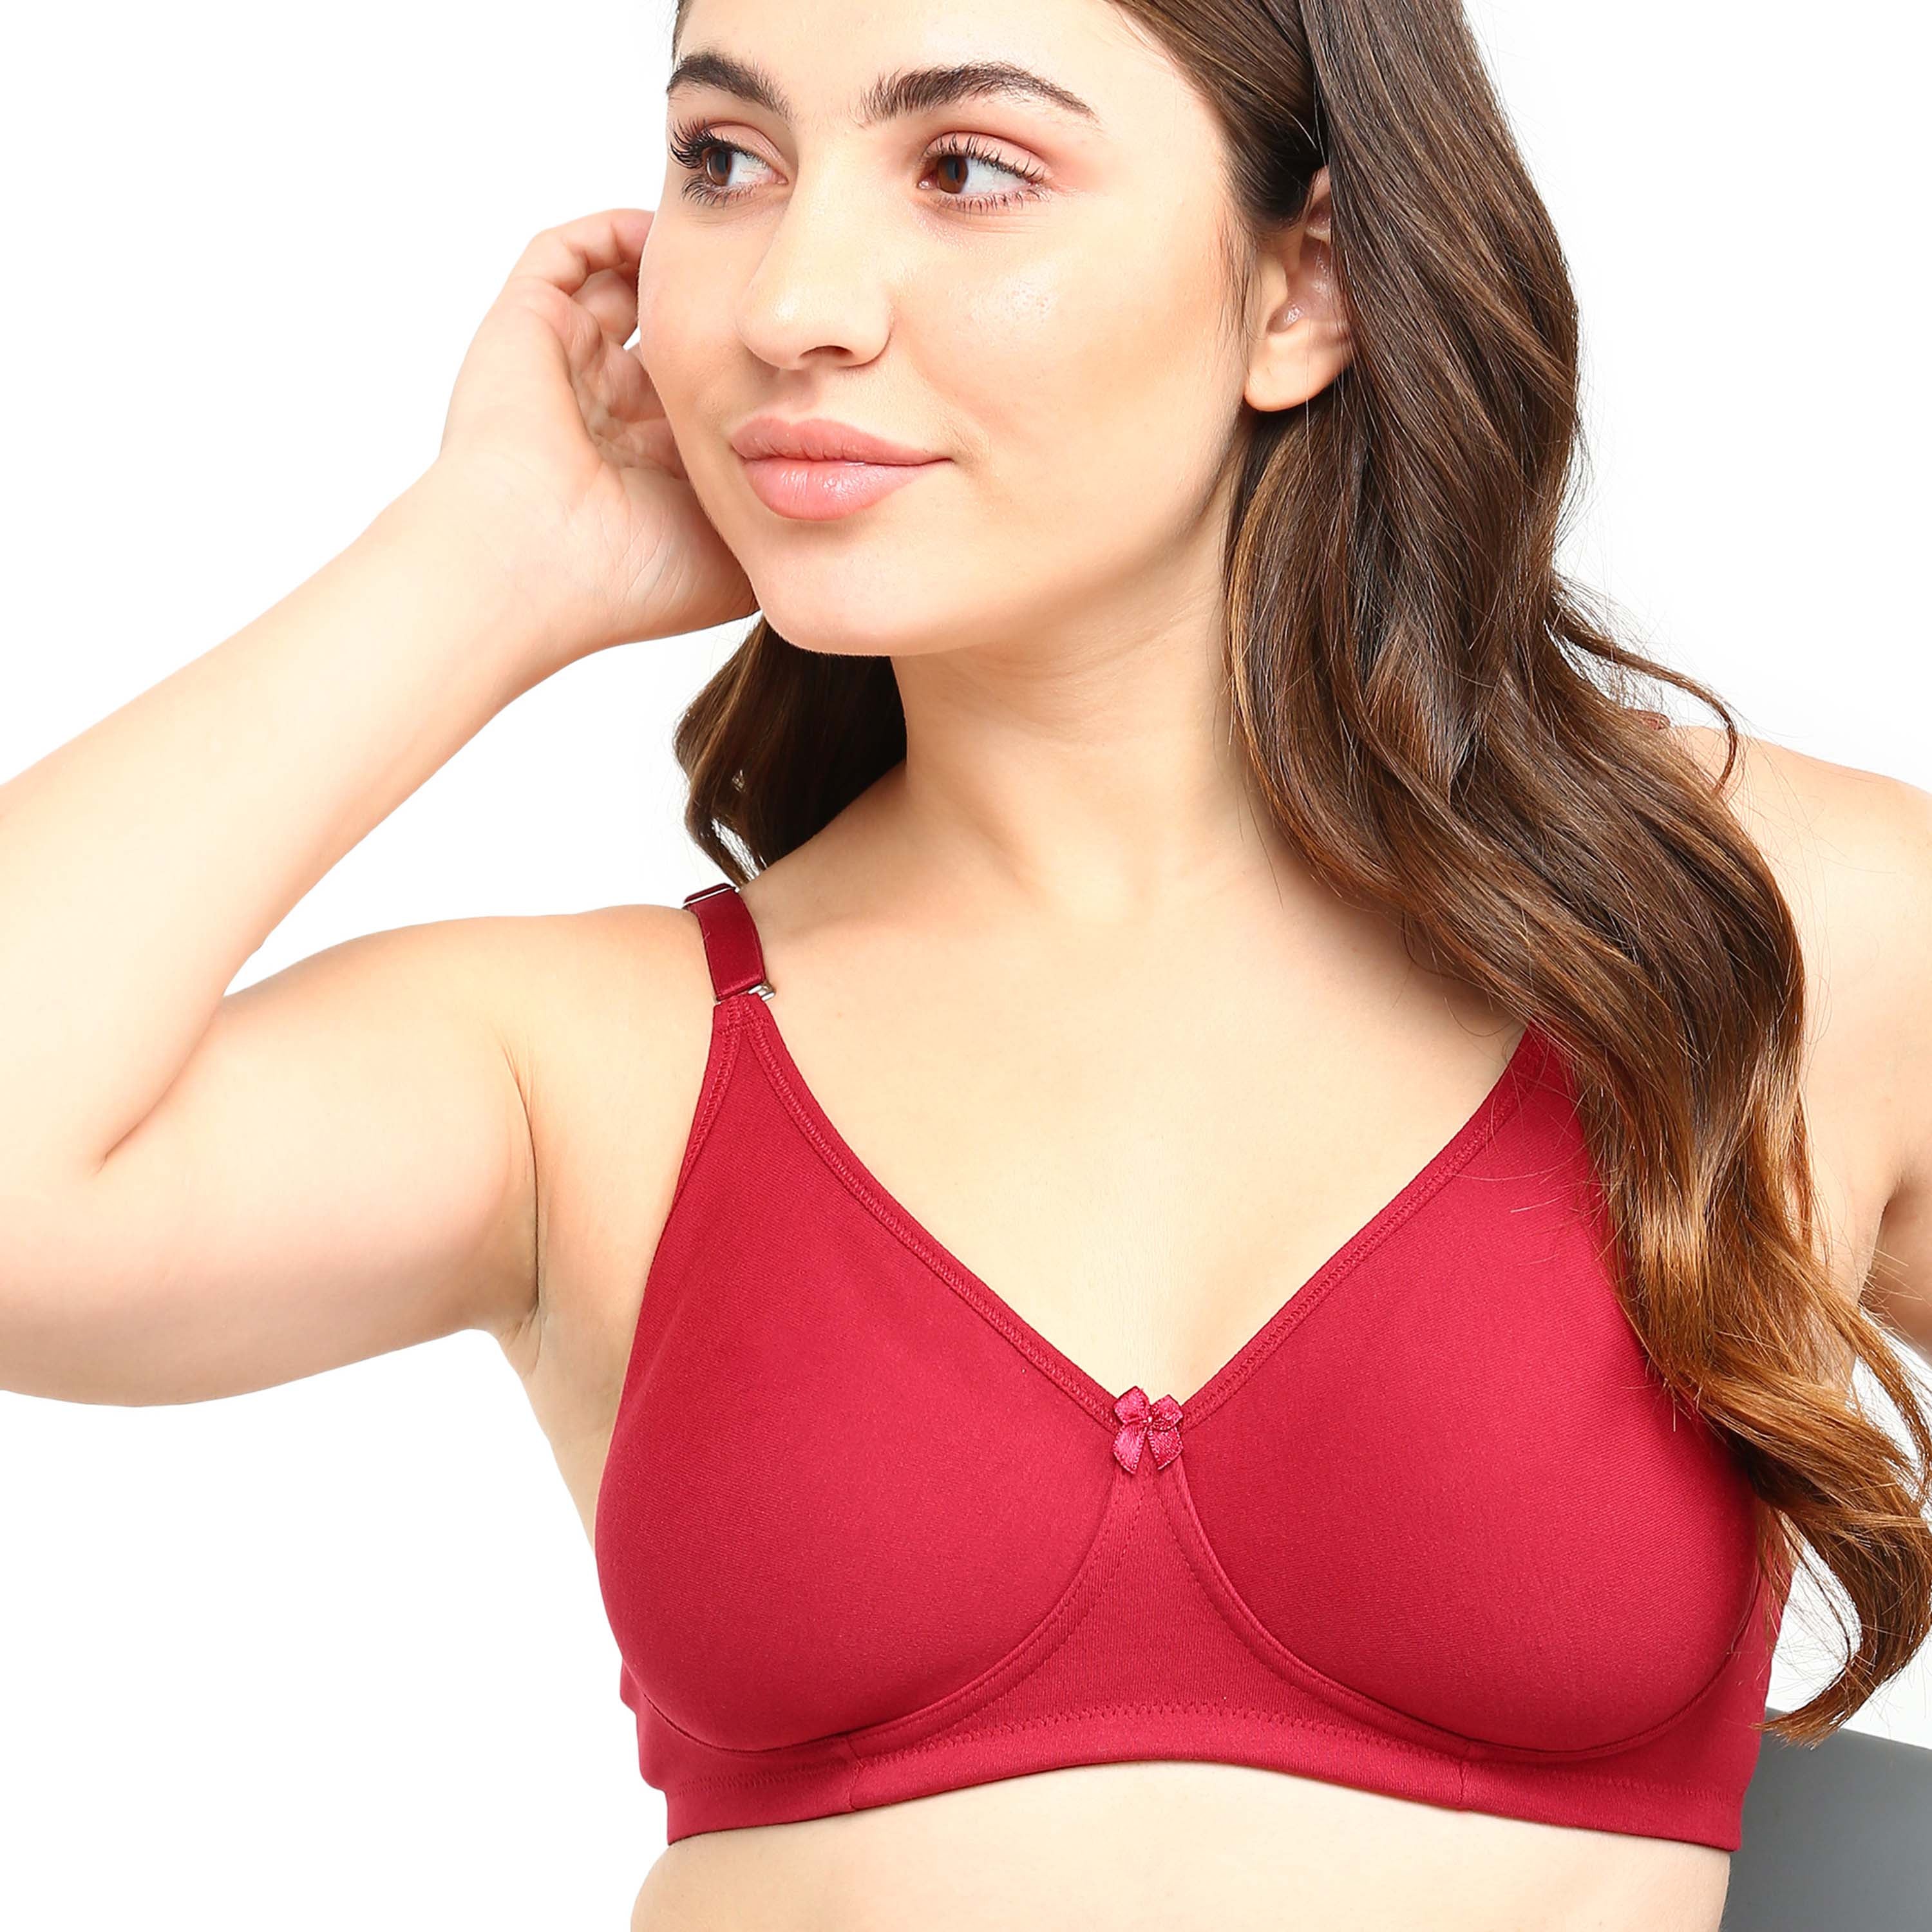 Blossom Inners - Summer has set in and it's time to keep things casual and  comfy. Blossom's T-shirt bra is all you need to look stylishly cool at all  times. It is